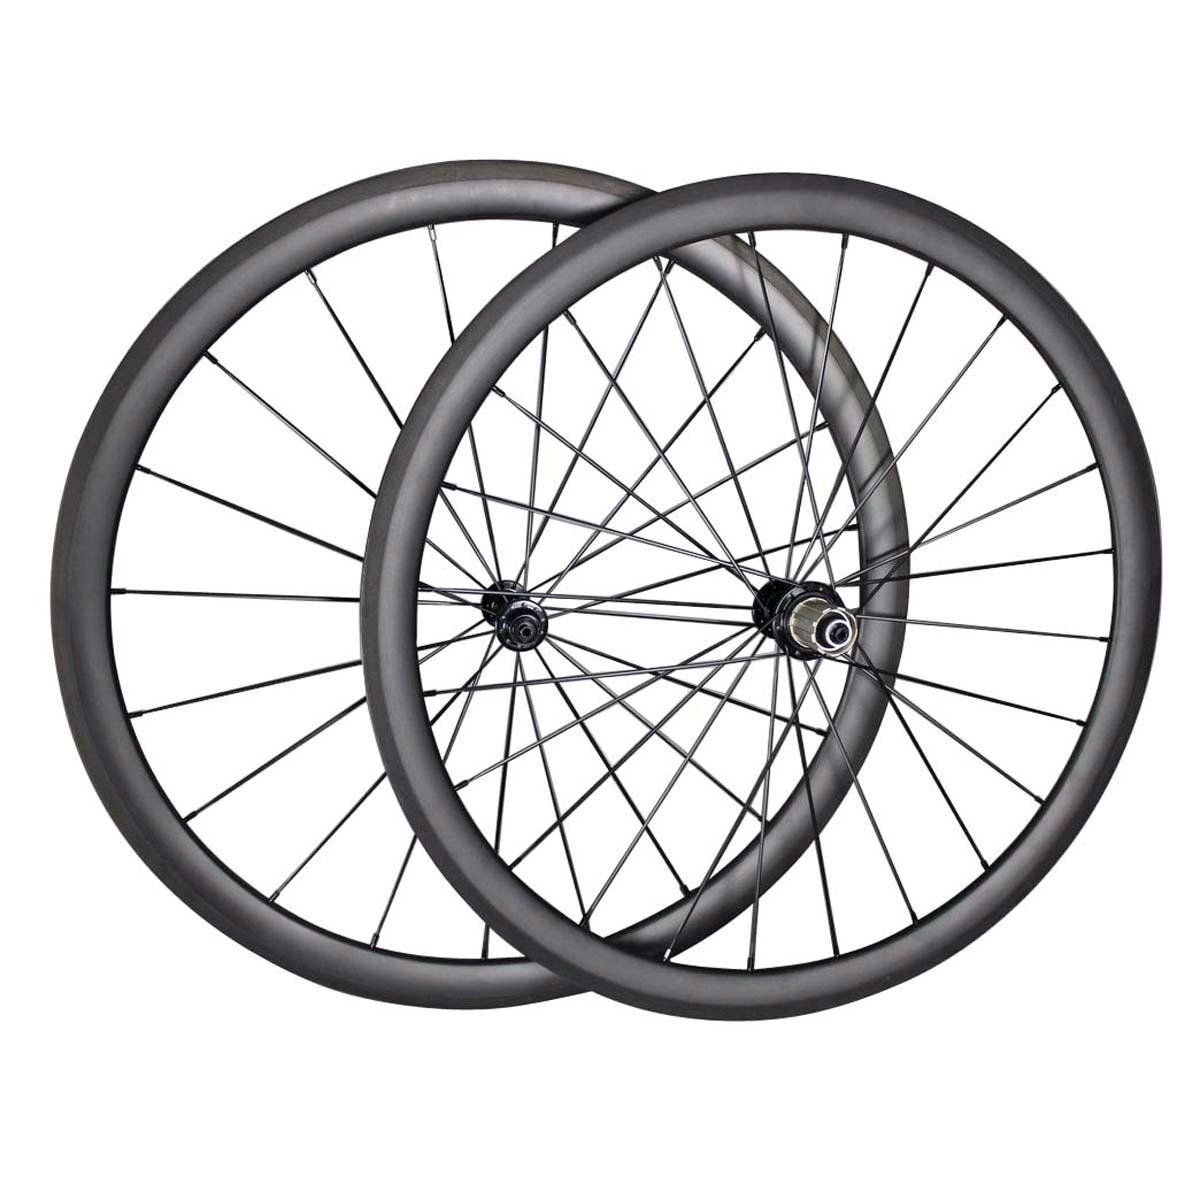 SunRay Cycling Full Carbon Road Bike Wheelset 38mm Carbon Clincher Wheelset